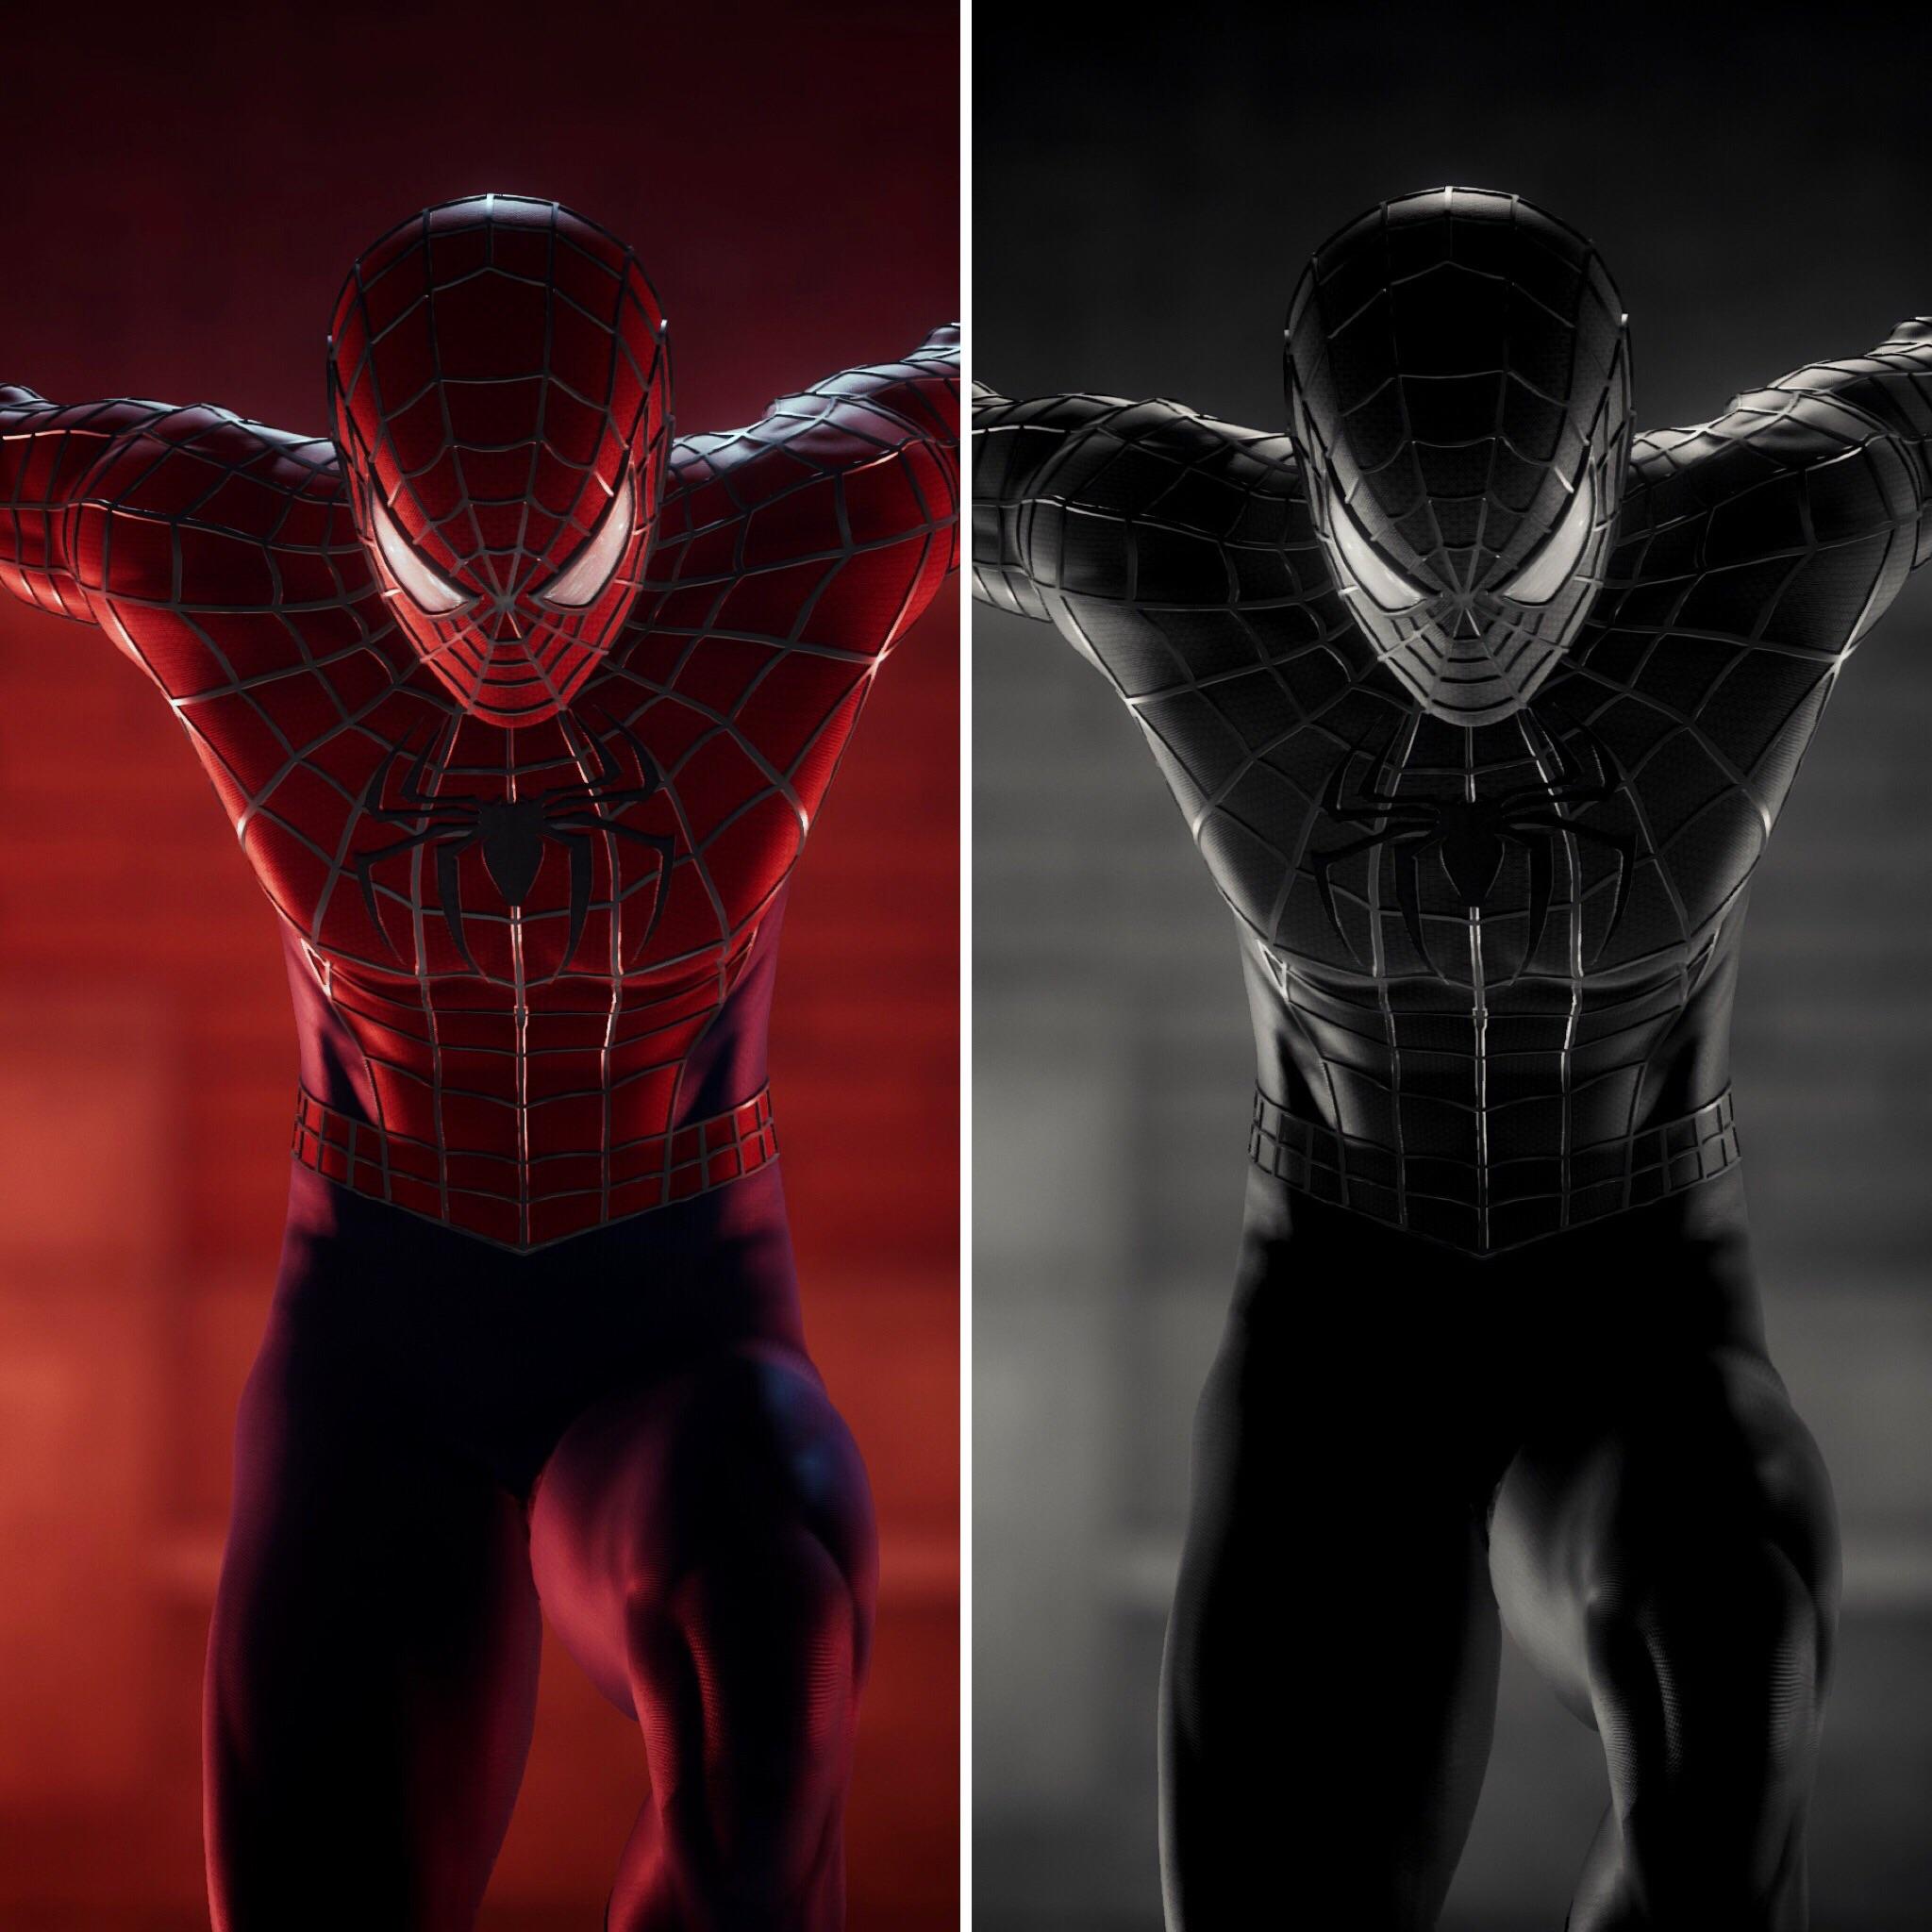 I have the Raimi Suit and Black Suit Wallpaper posted on my profile if anyone's interested